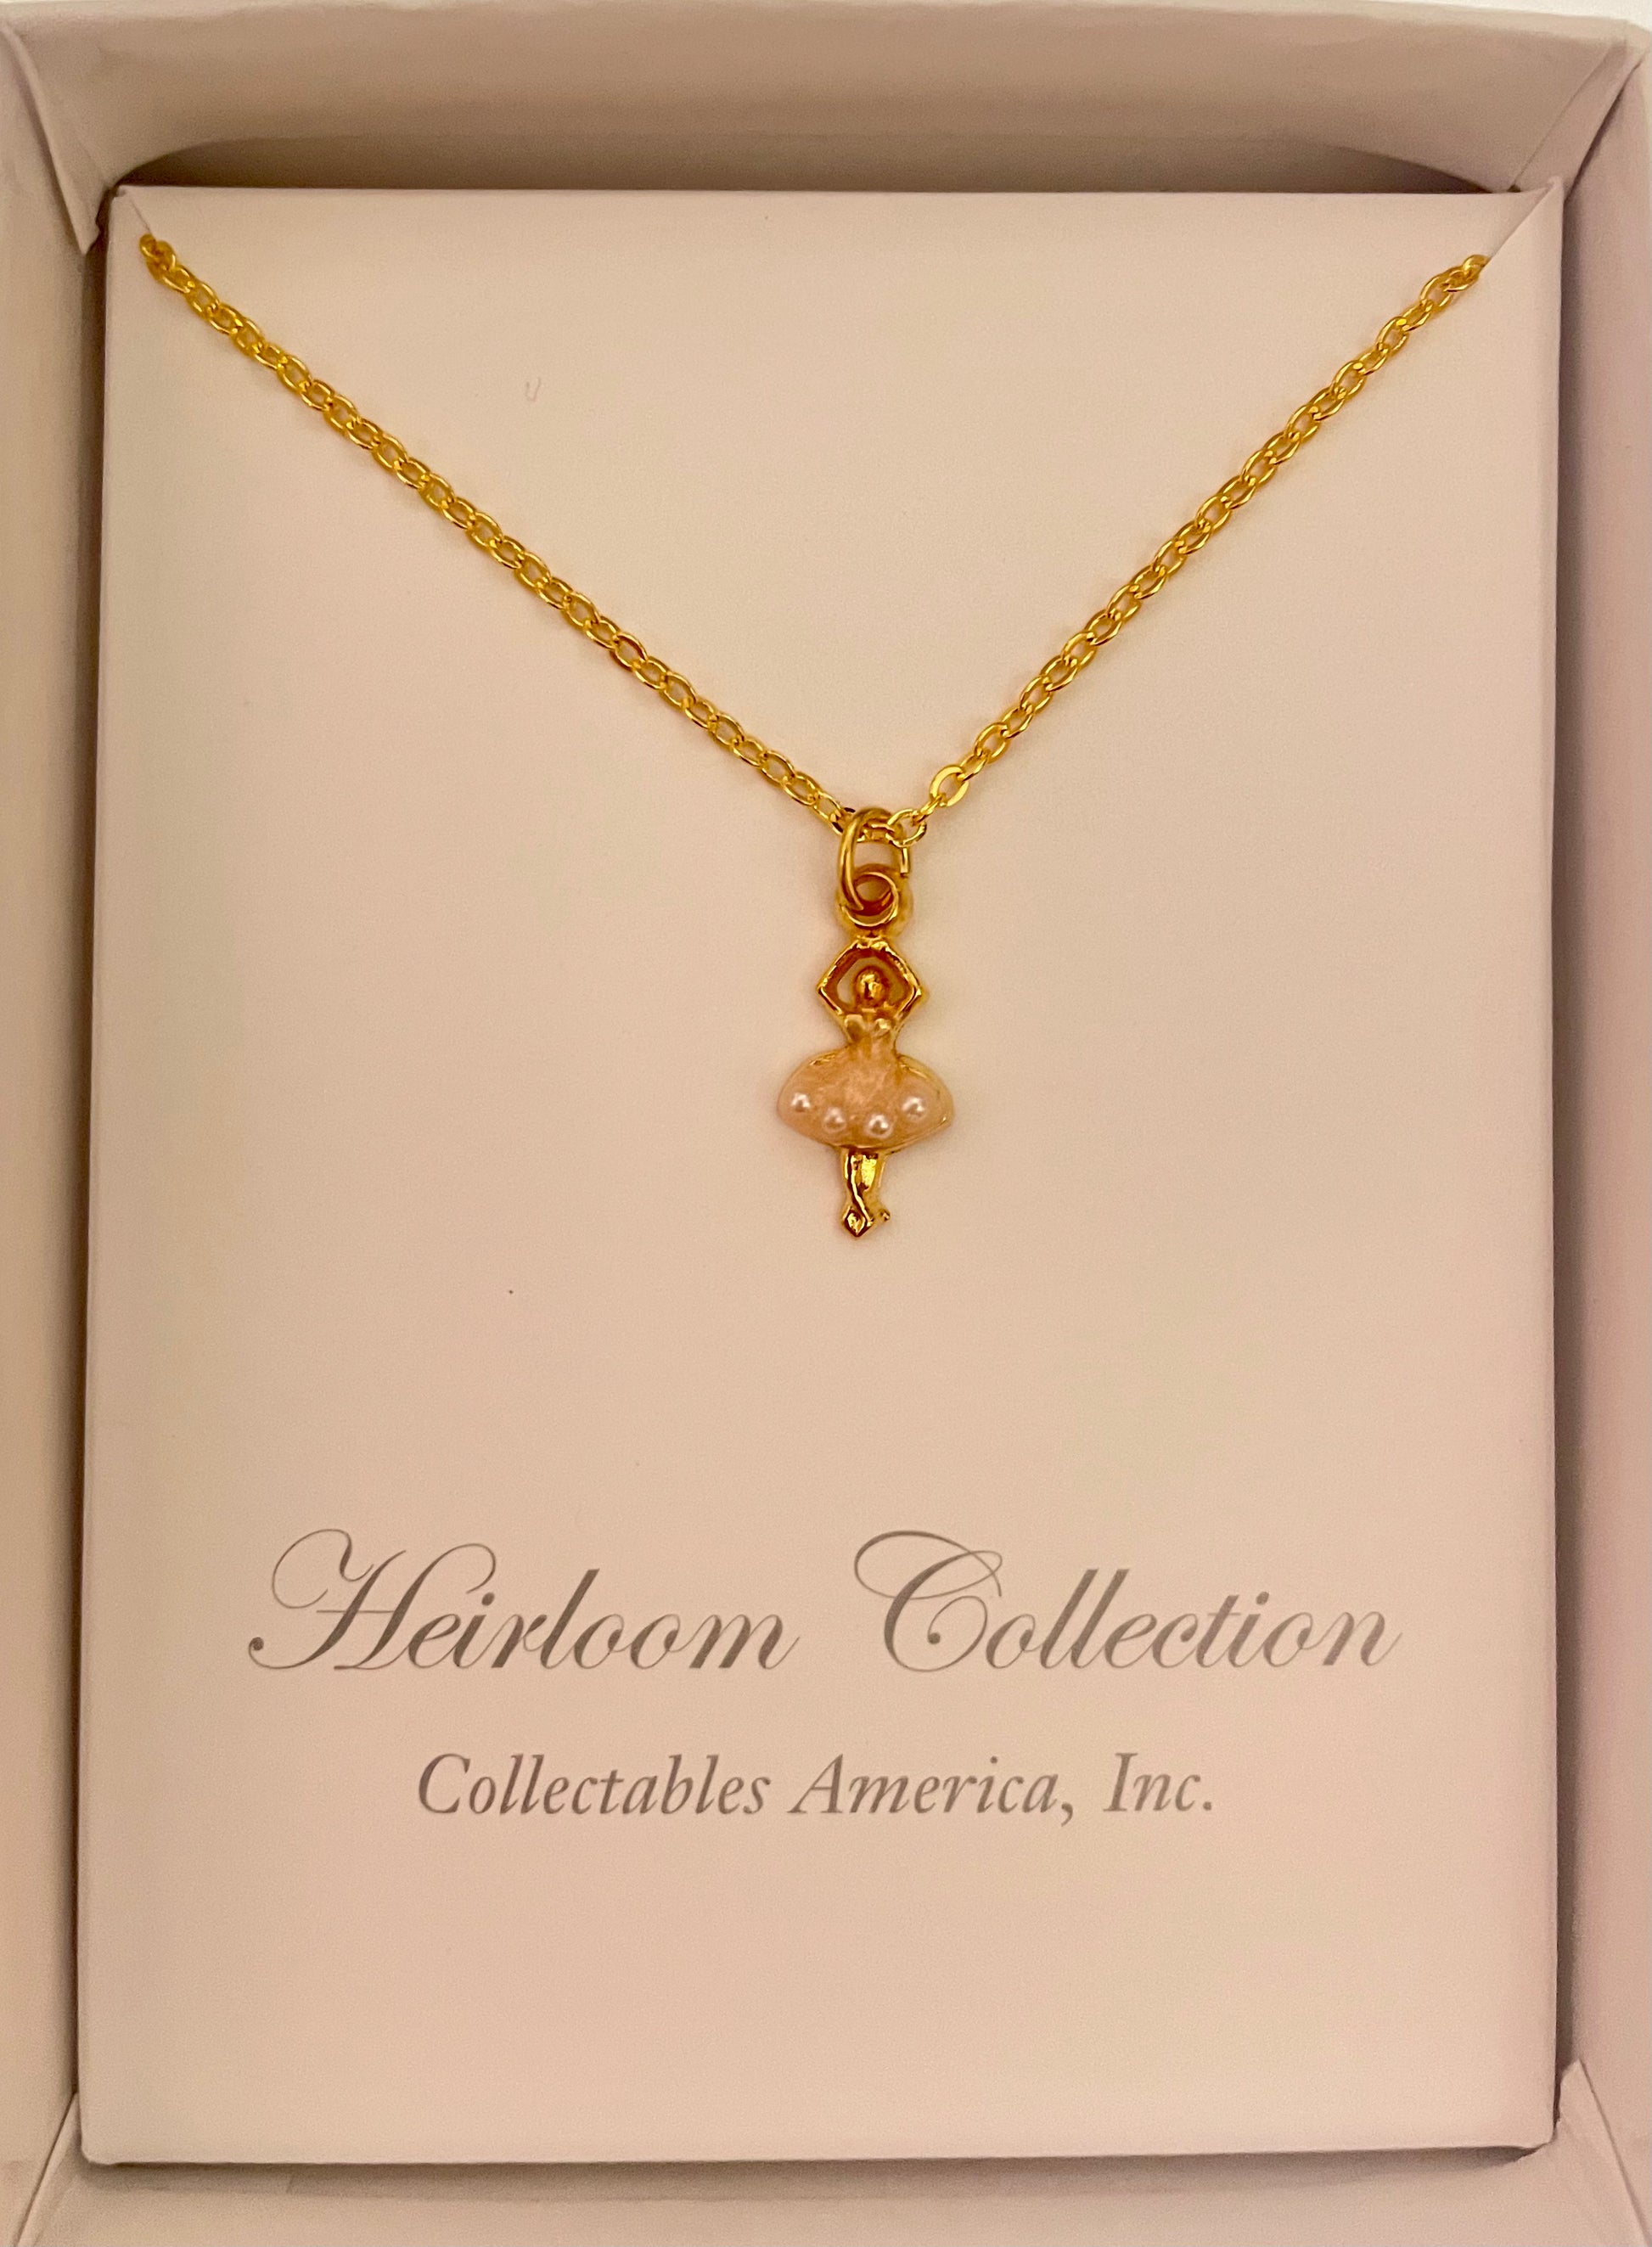 A Collectables America Gold Ballerina Necklace in a box on a table.